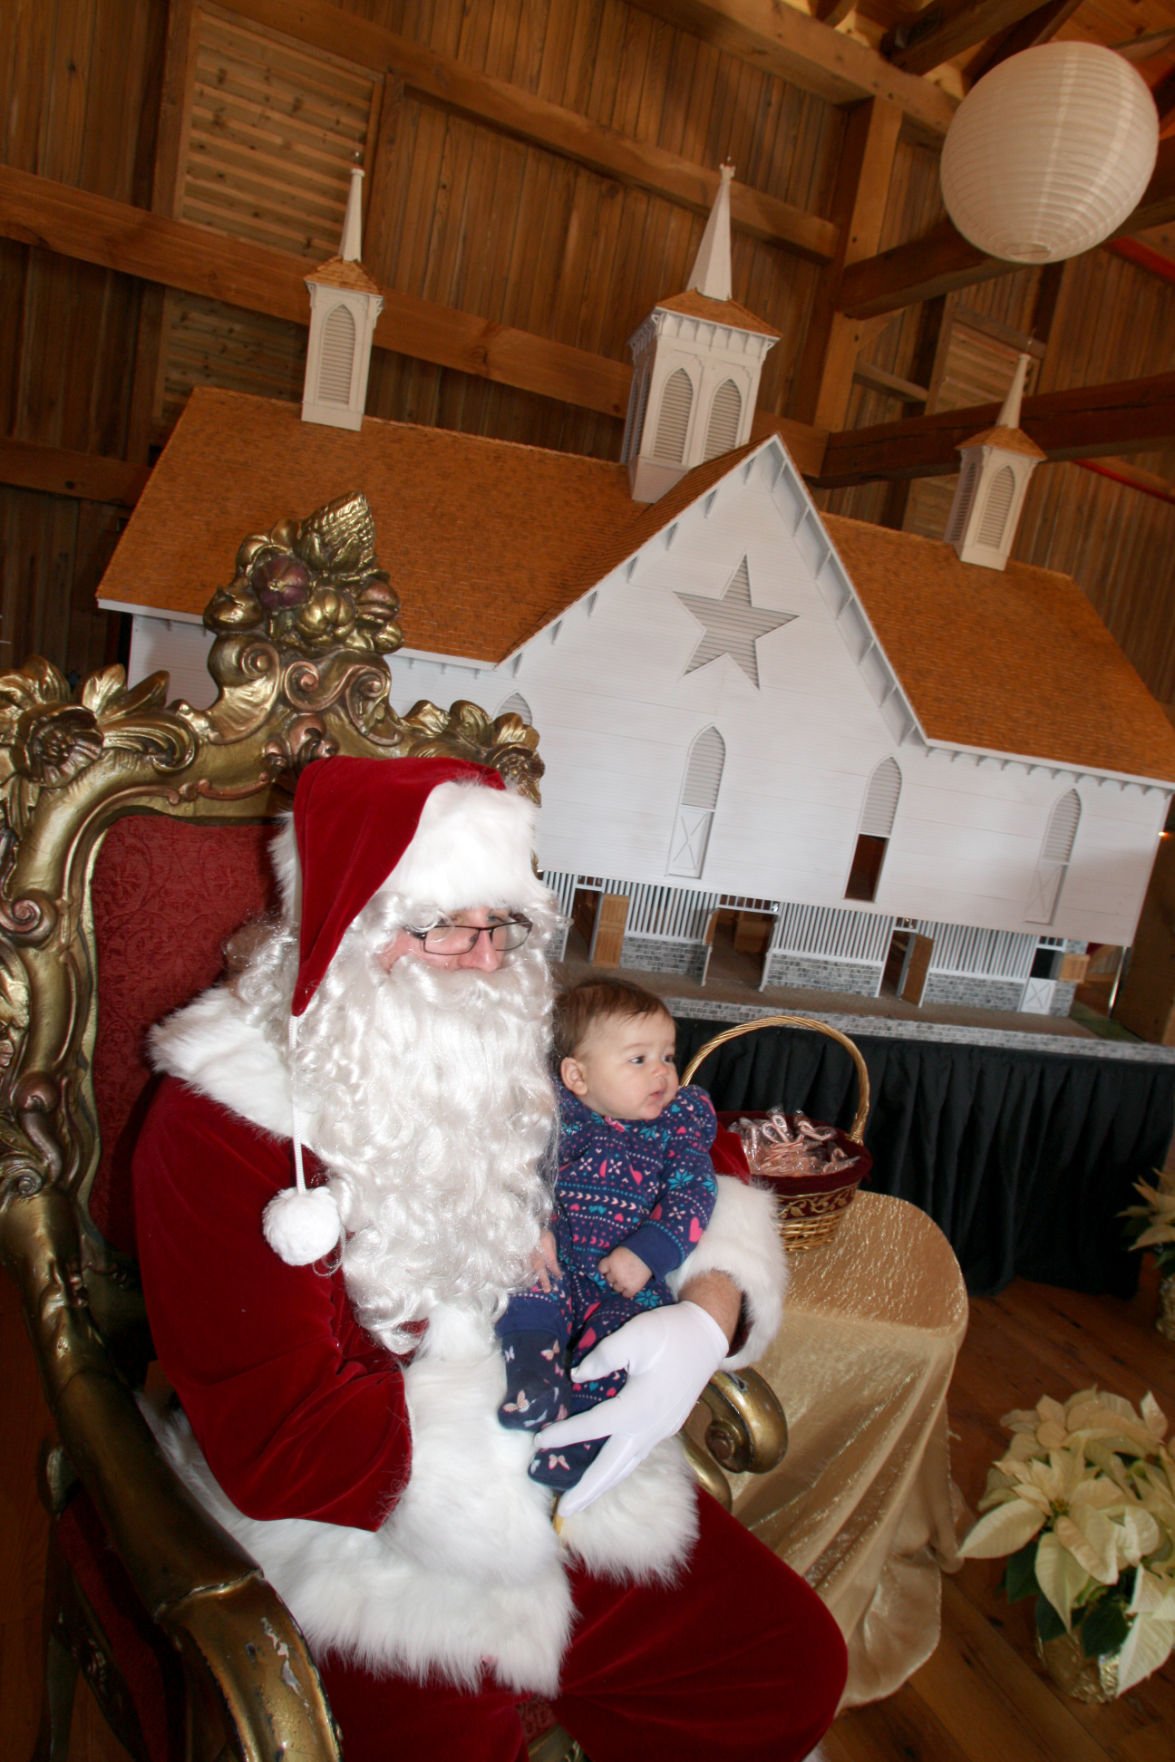 'Christmas at Ironstone' event raises 30,000 for Brittany's Hope